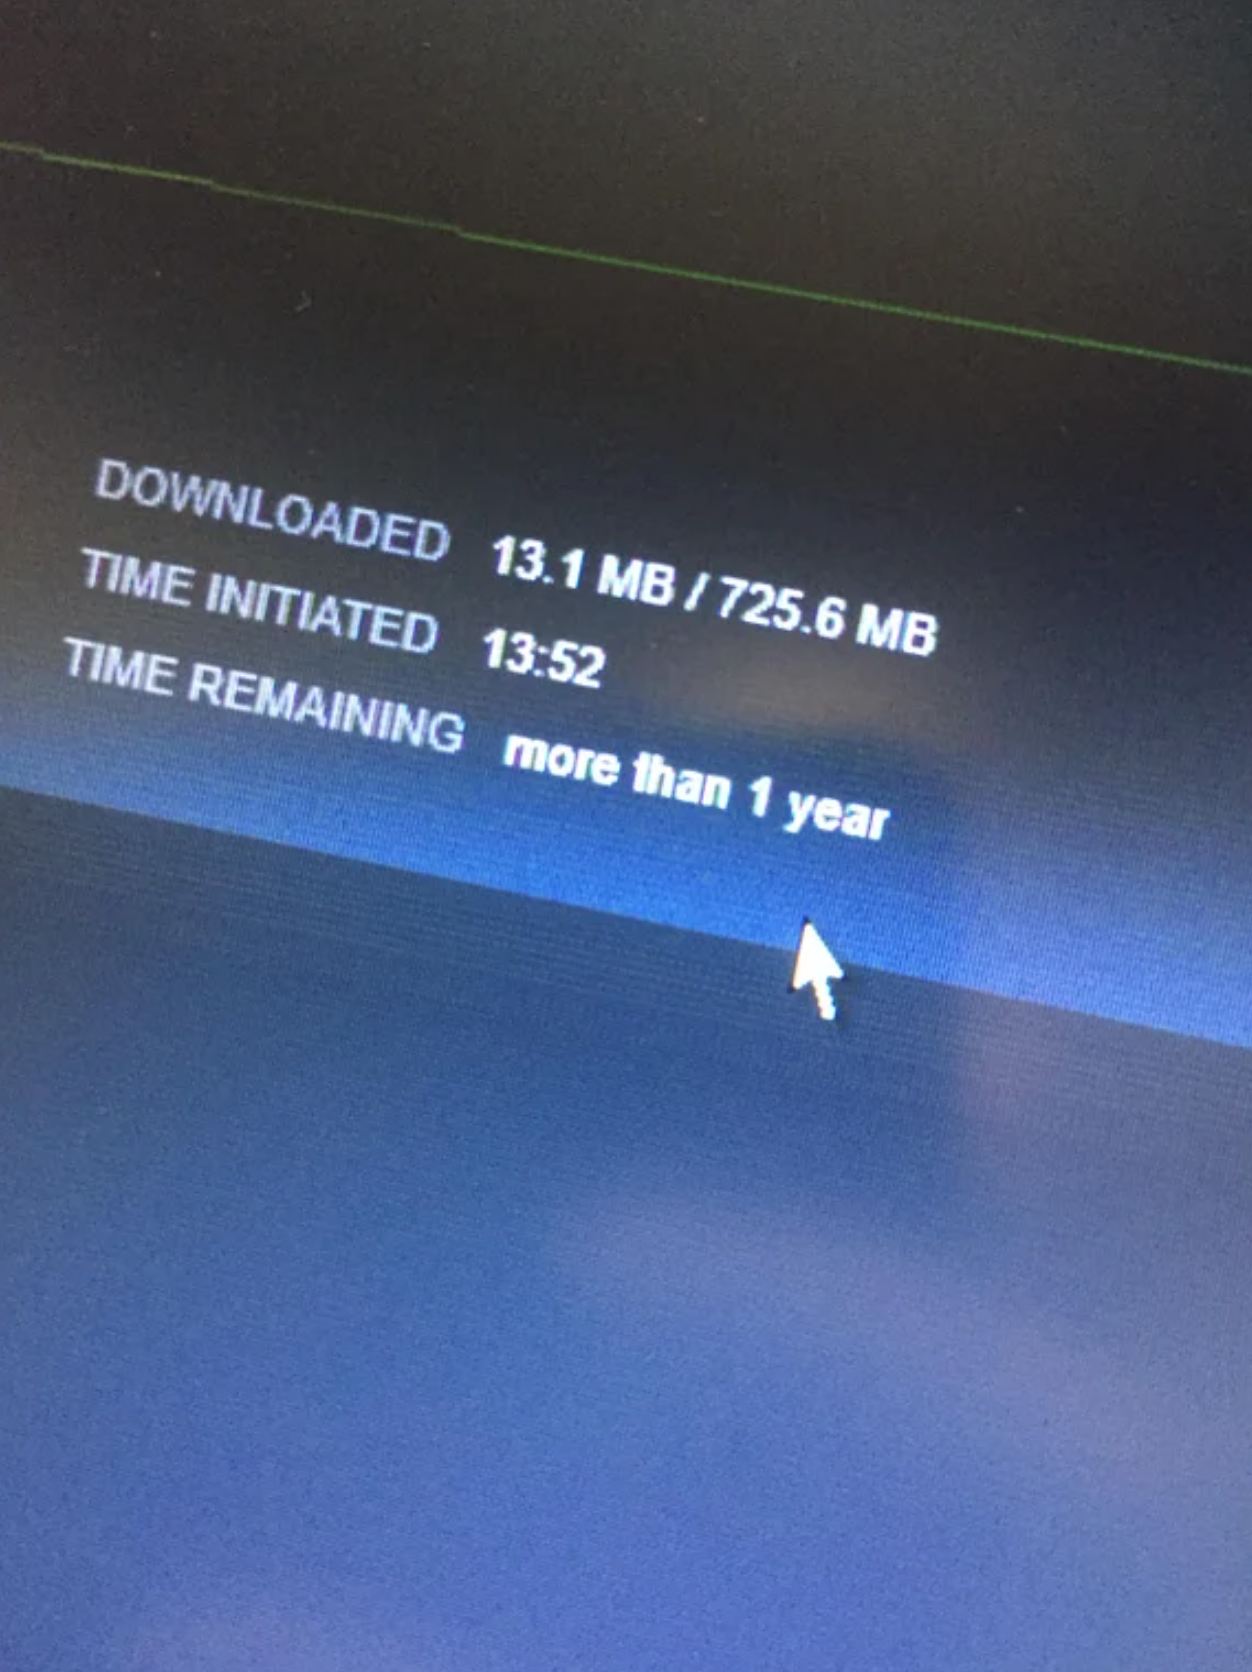 gaming memes - atmosphere - Downloaded 13.1 Mb 1725.6 Mb Time Initiated Time Remaining more than 1 year